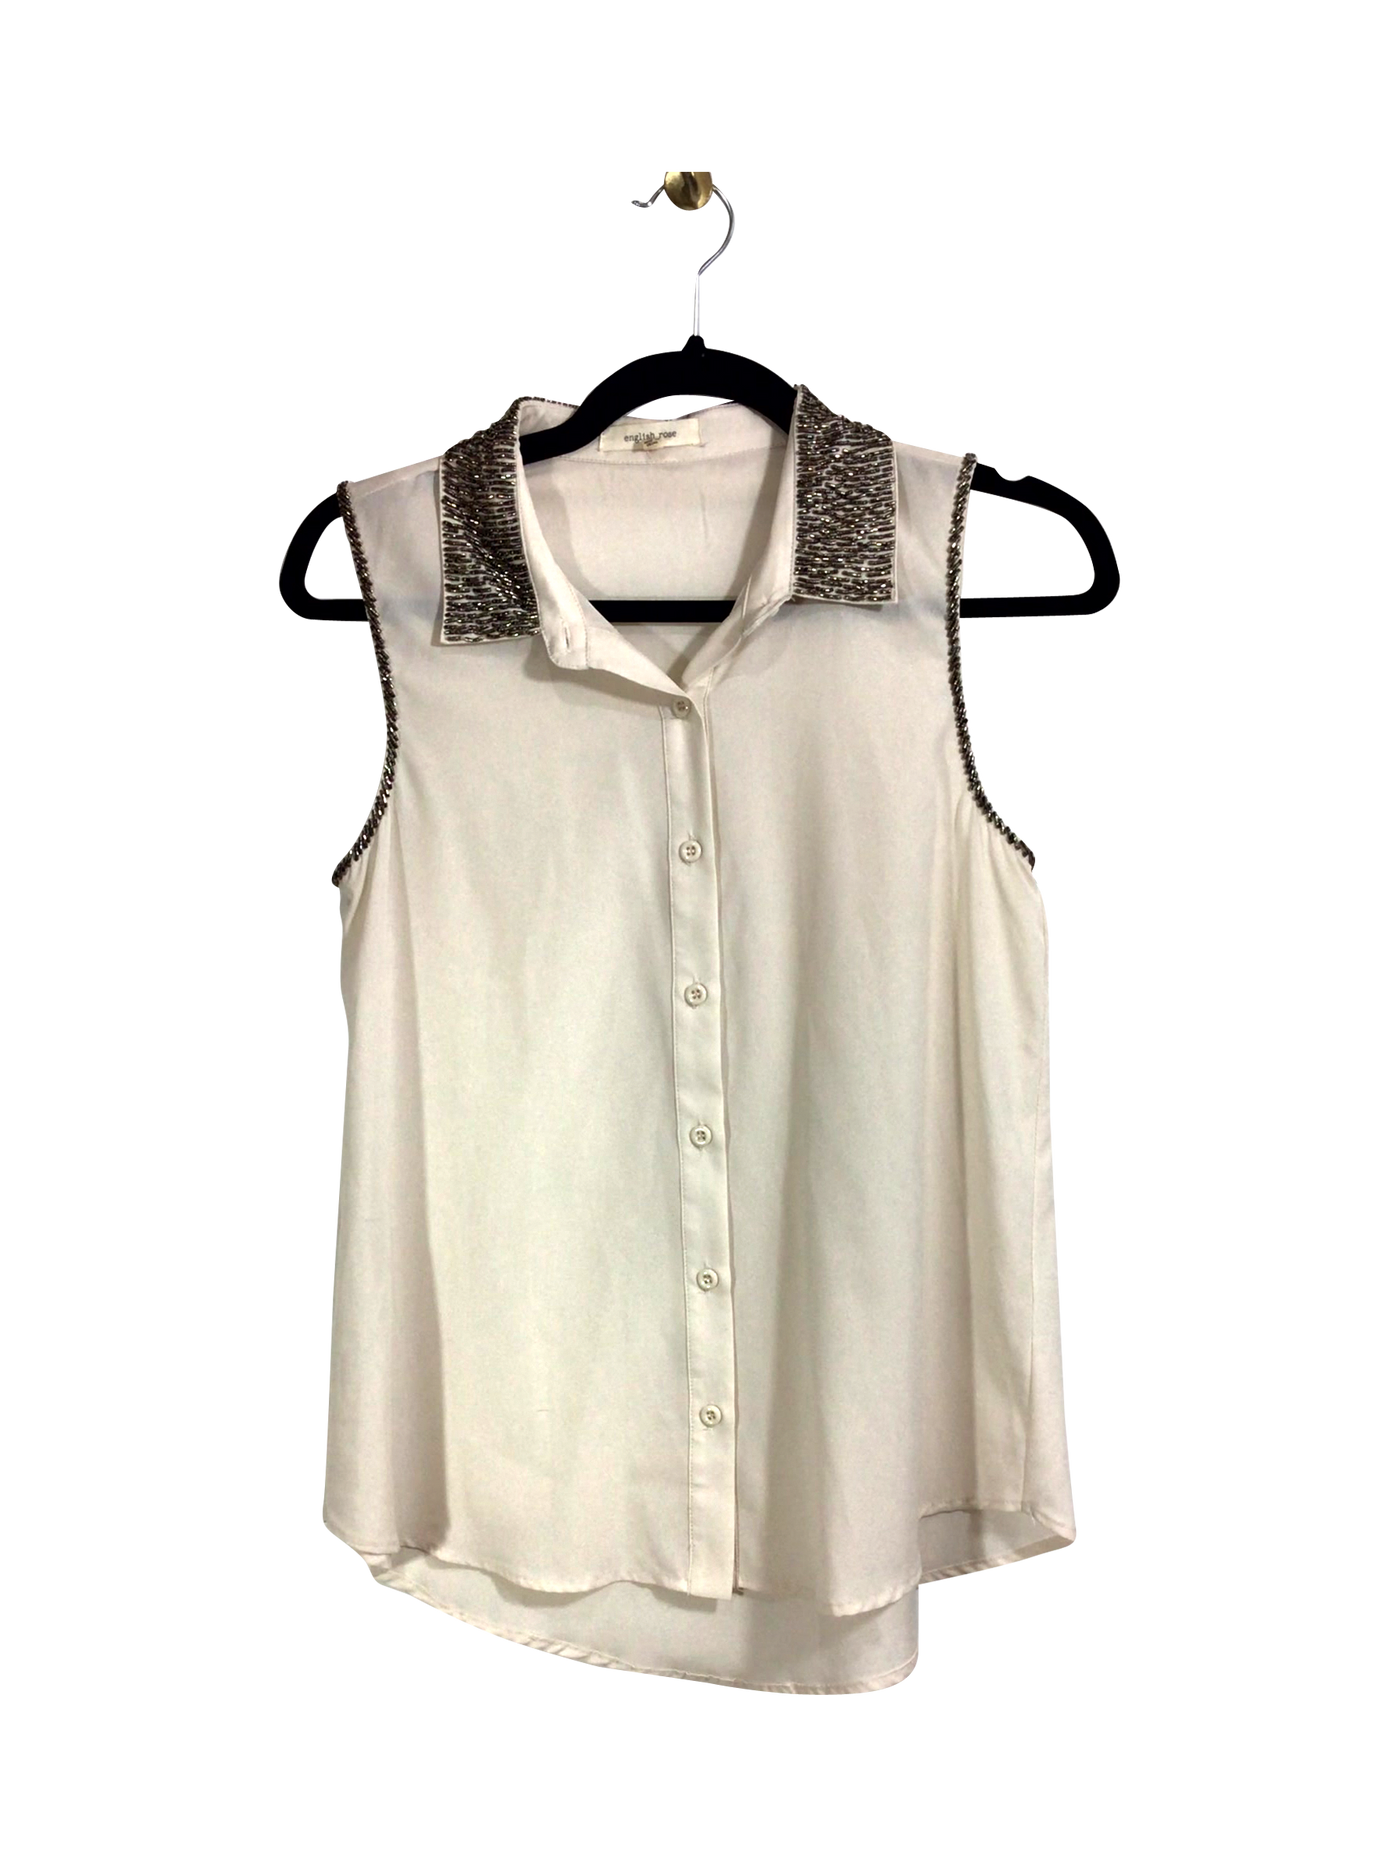 ENGLISH ROSE Button-down Top Regular fit in White - Size S | 15 $ KOOP